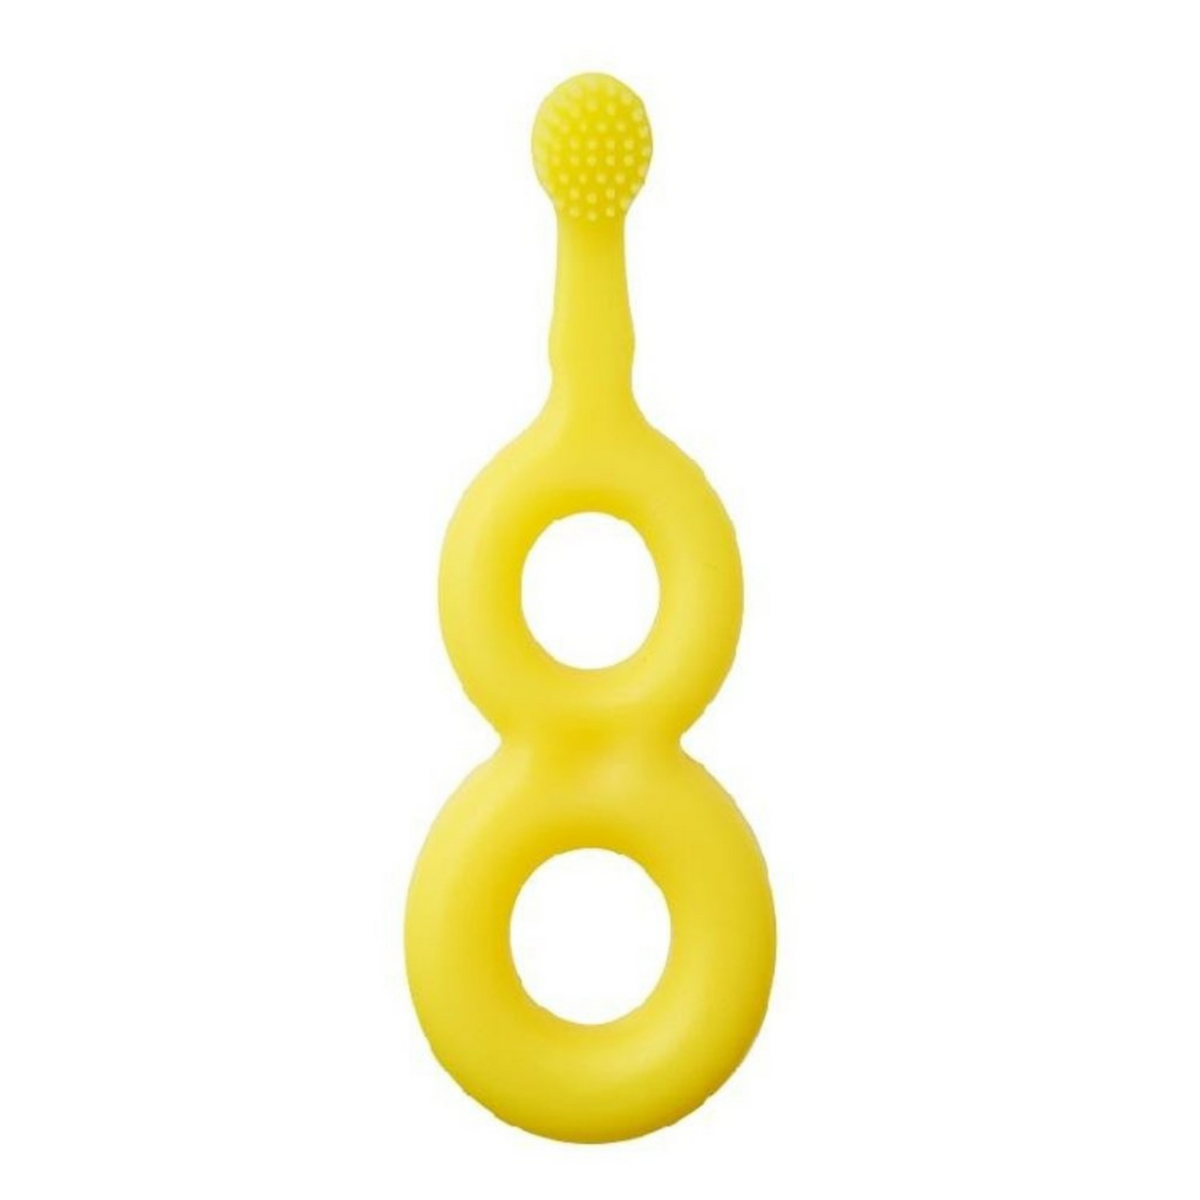 Primary Image of Hamico Teething Toothbrush